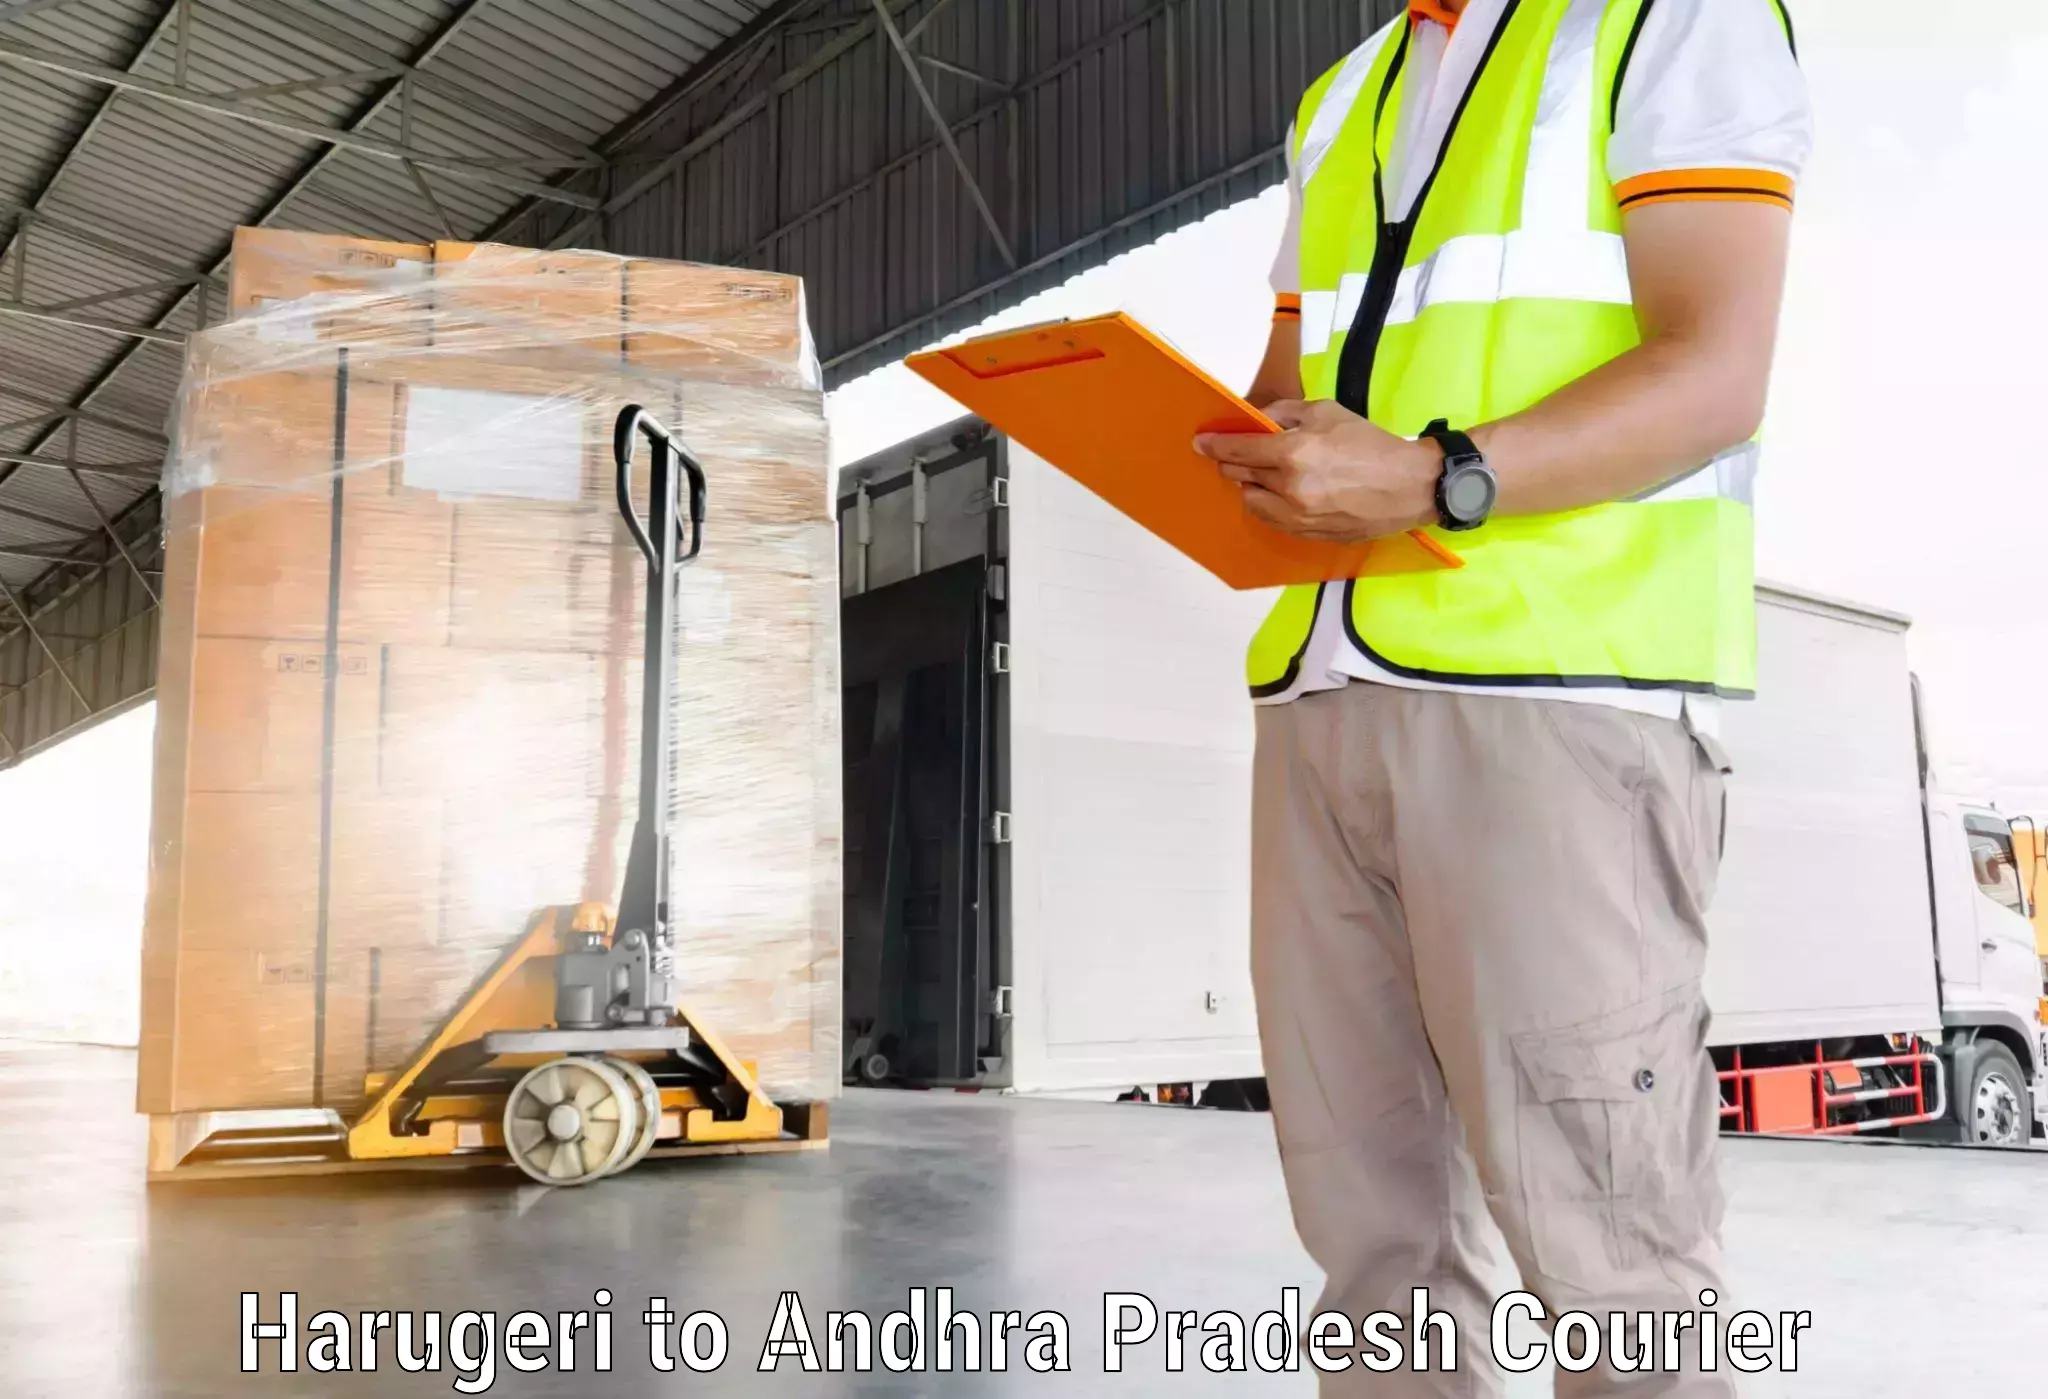 Dynamic courier operations in Harugeri to Gopalapatnam